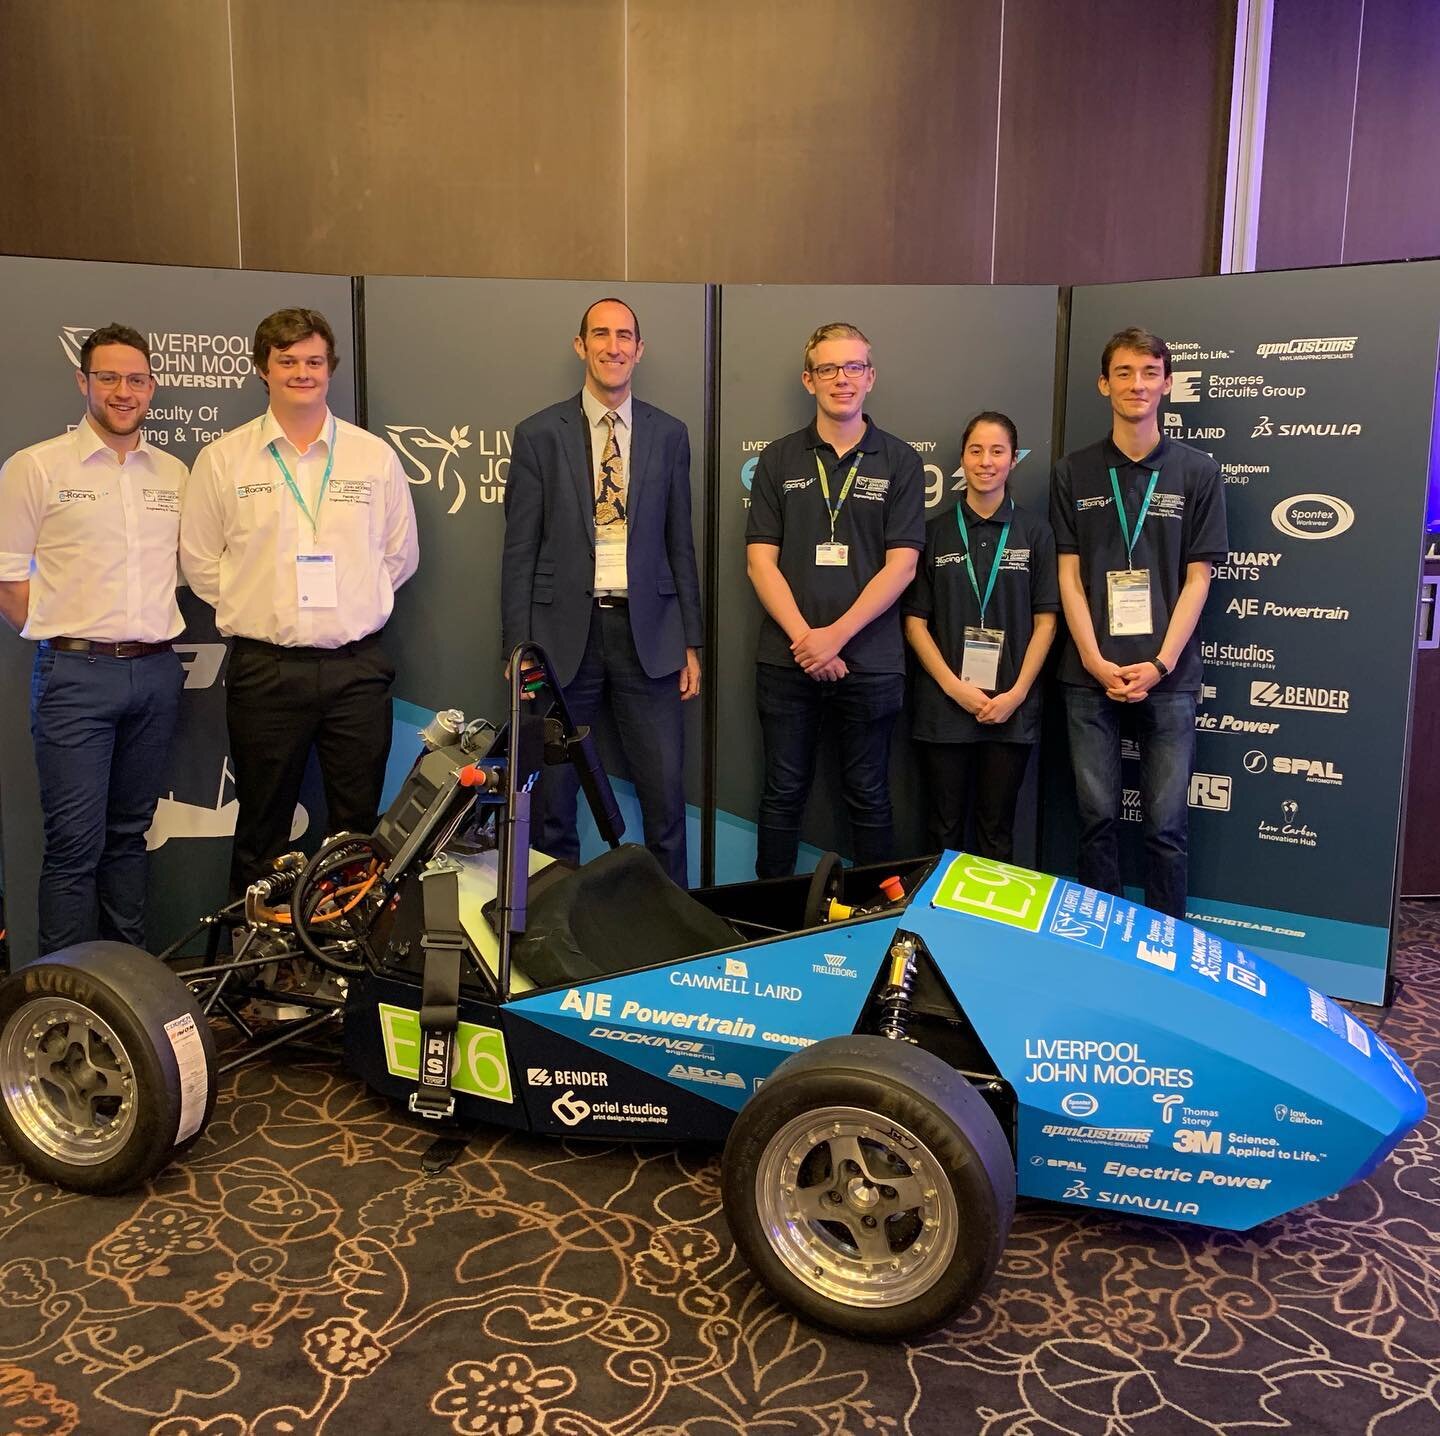 The LJMU eRacing team are spending the day at our sponsor Simulia Regional Users Meeting here in liverpool.
The support Simulia have given the team has been fantastic and team are appreciative of the sponsorship. #studentmotorsport
#UKRUM2019 #LJMU #